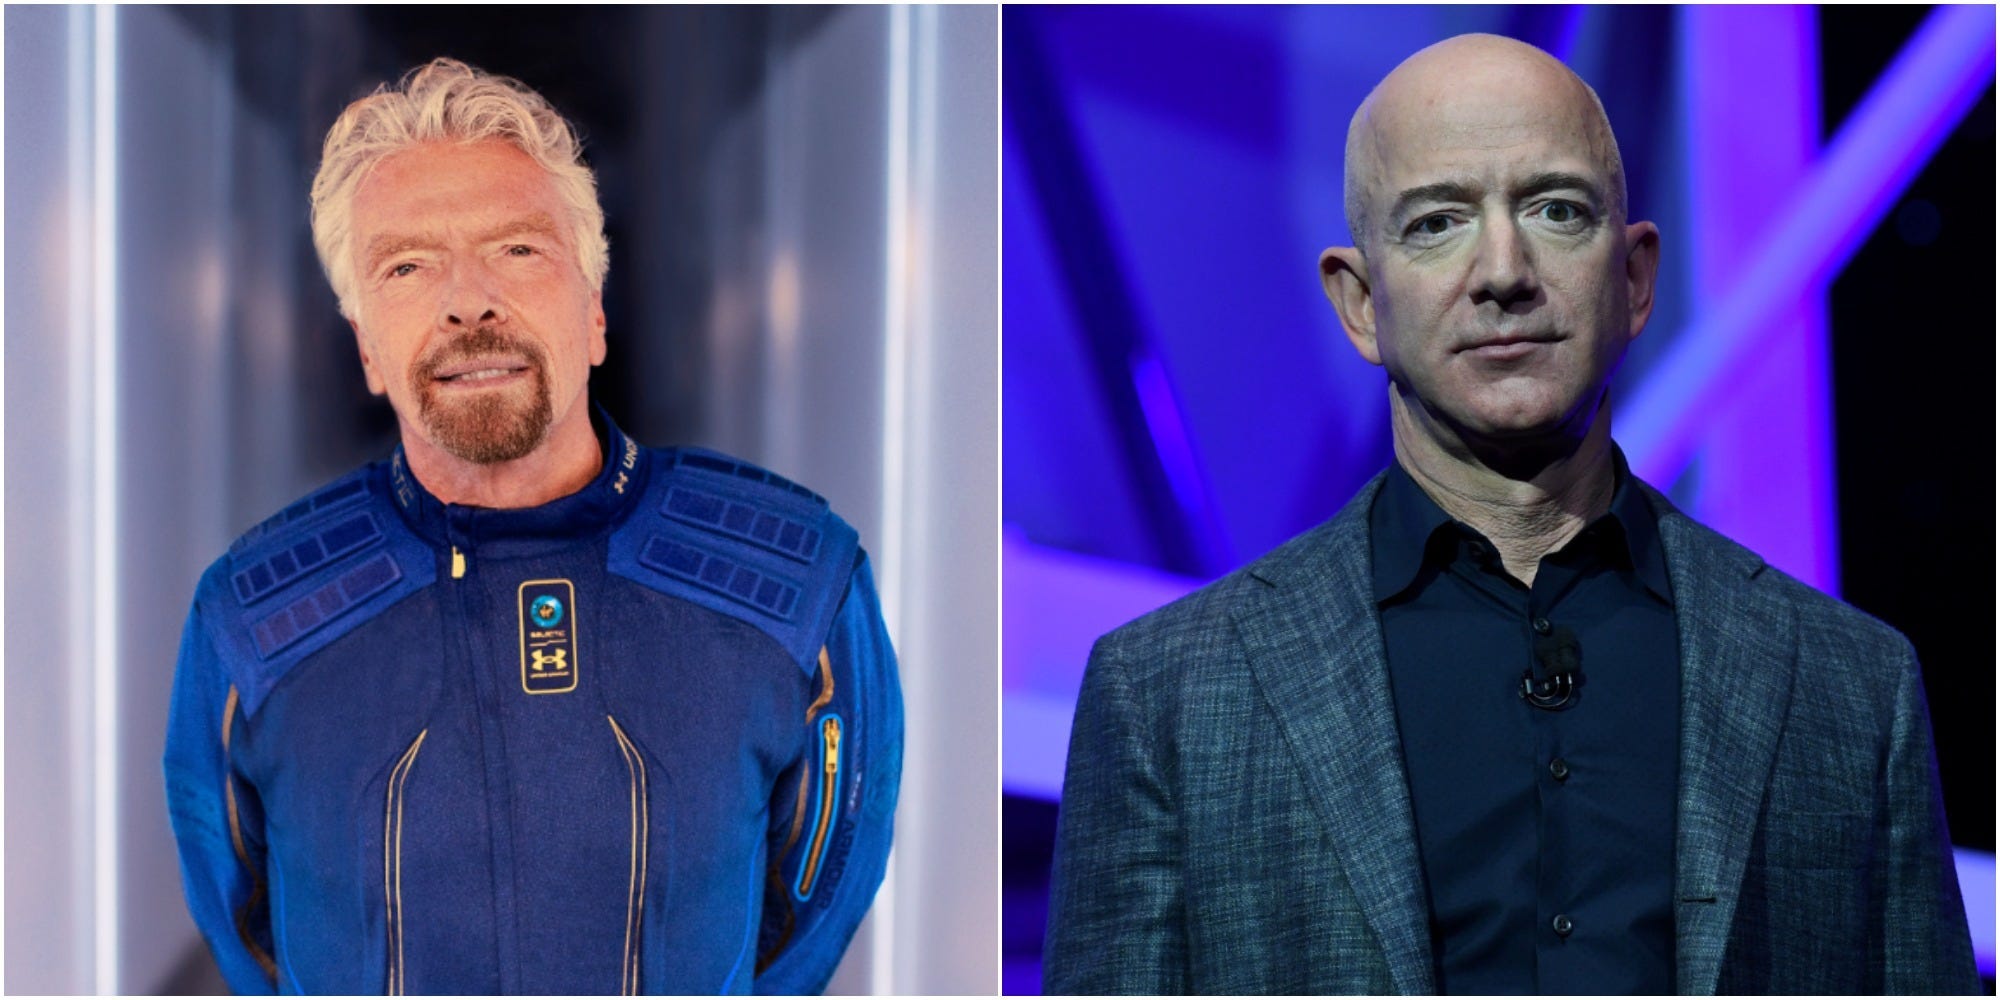 10 things in tech: Richard Branson is space bound, Instacart’s next CEO, Dodge’s electric muscle car